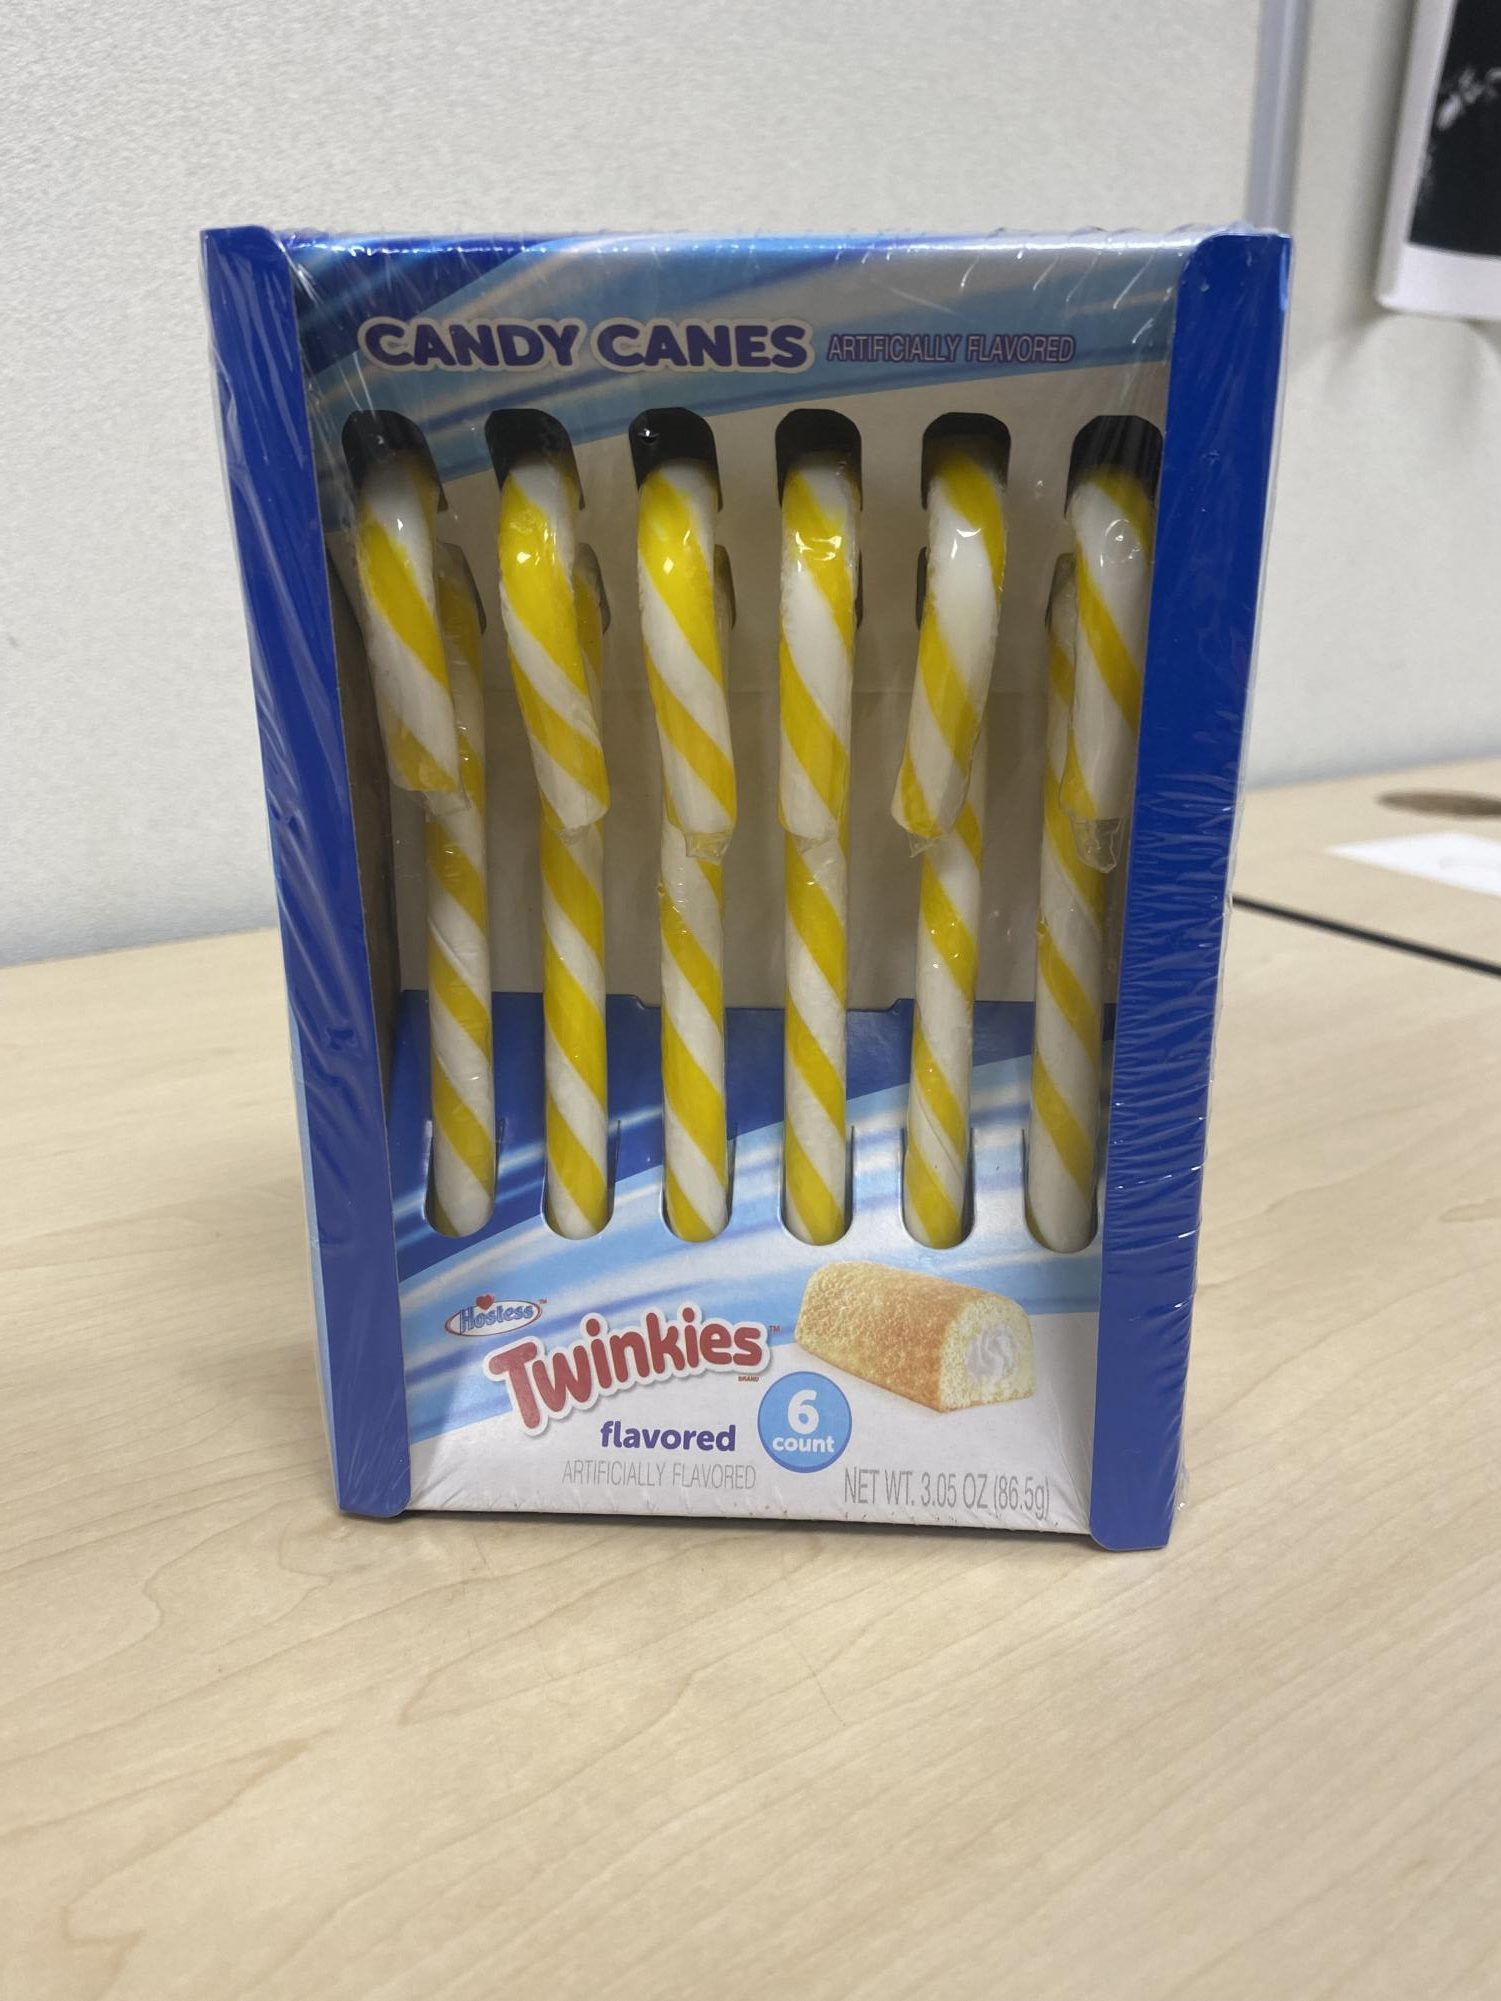 Twinkie candy canes